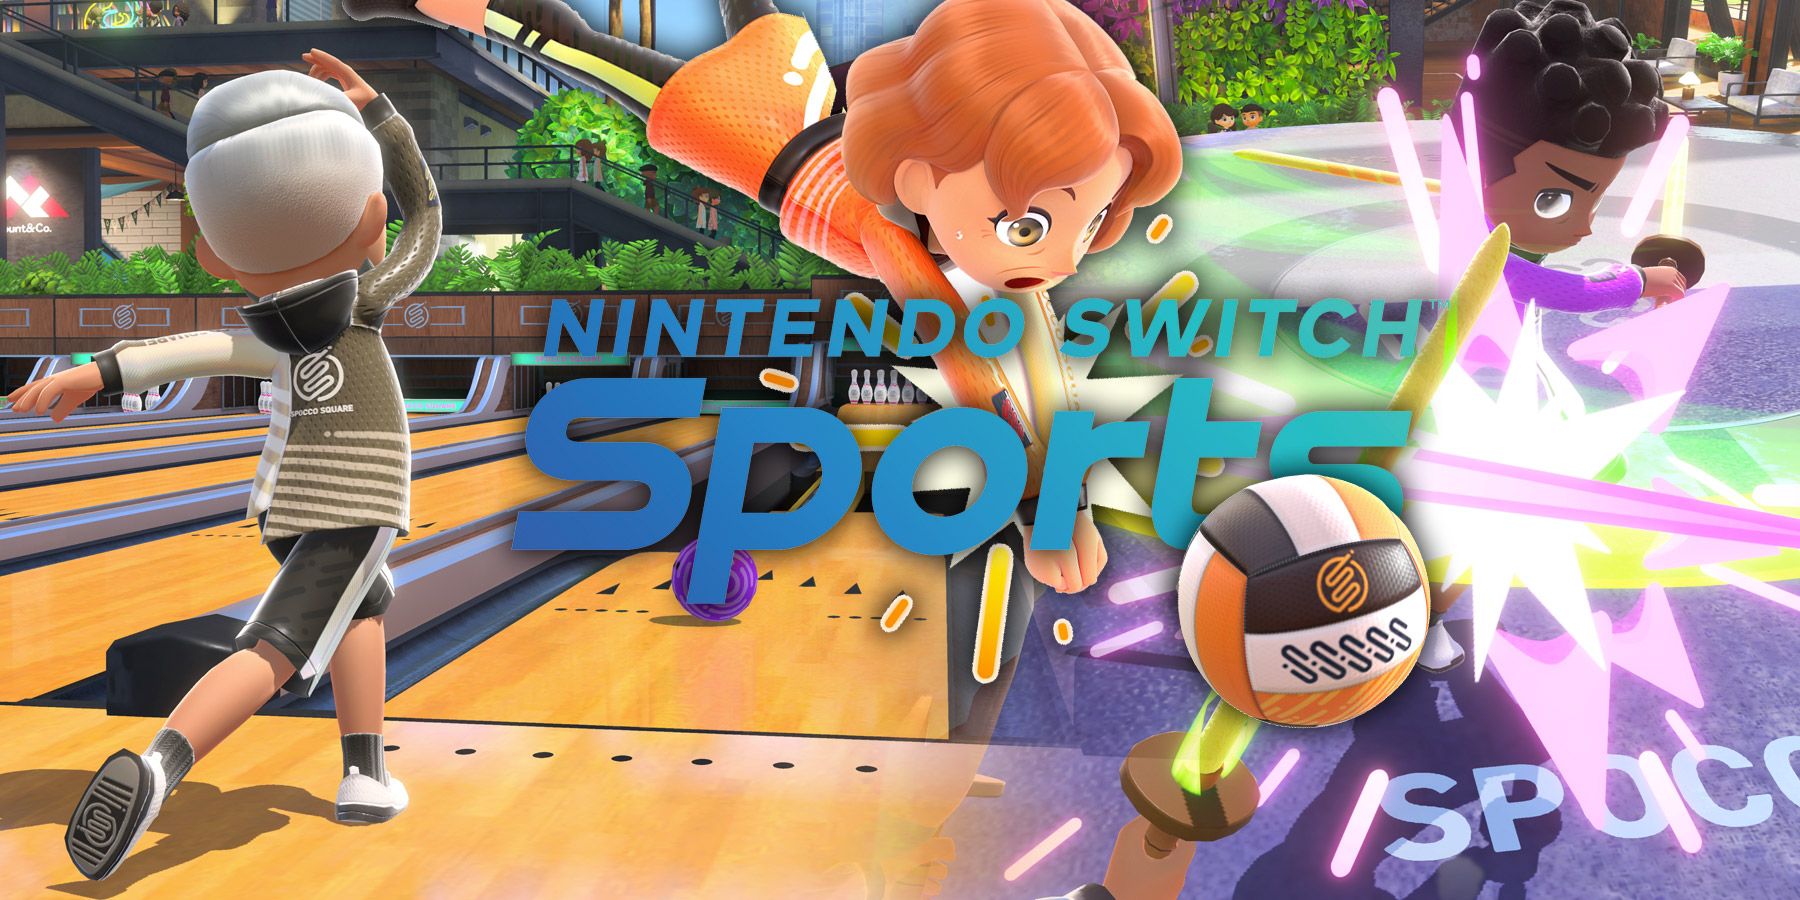 Review: Wii Sports Resort: Nintendo's Wii Sports reboot does more